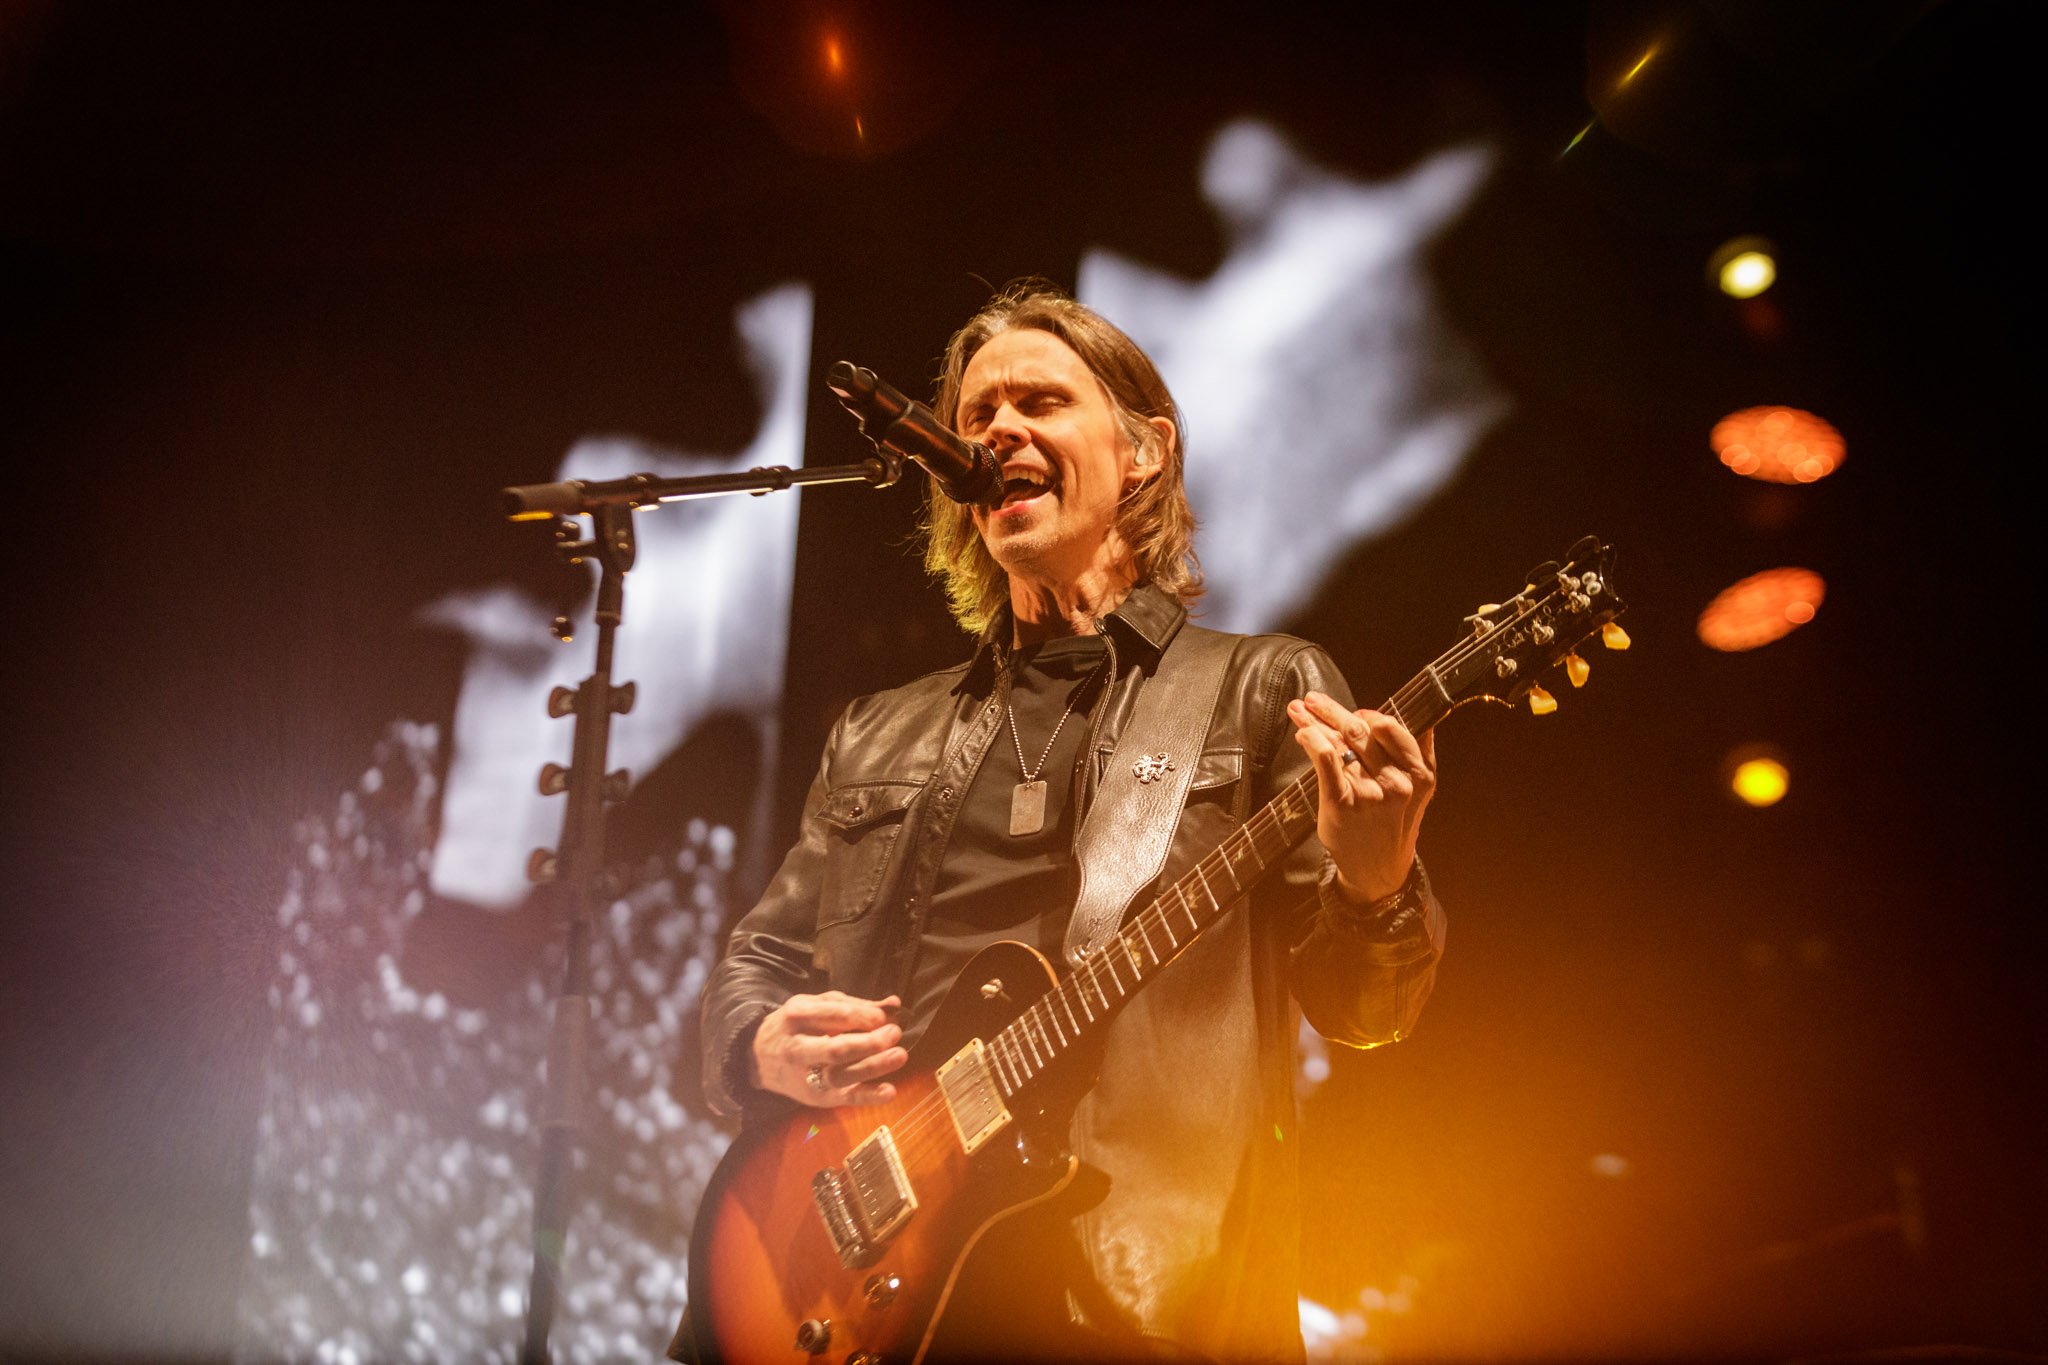 Alter Bridge at the AO Arena in Manchester on December 9th 2022 